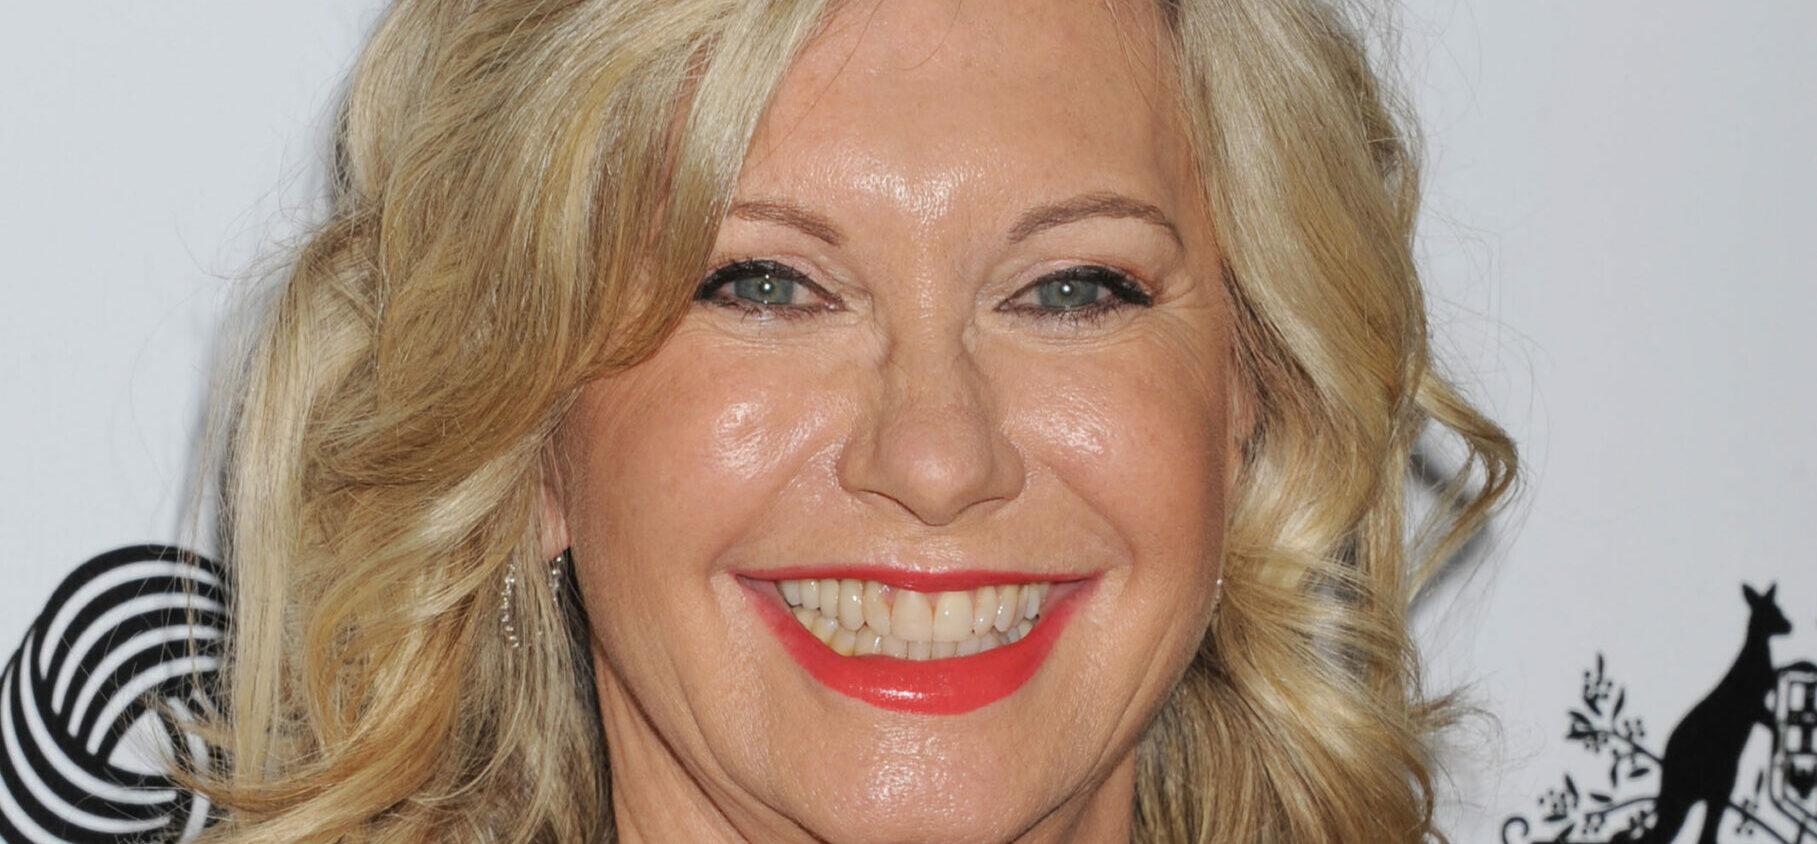 Olivia Newton-John has died at the age of 73